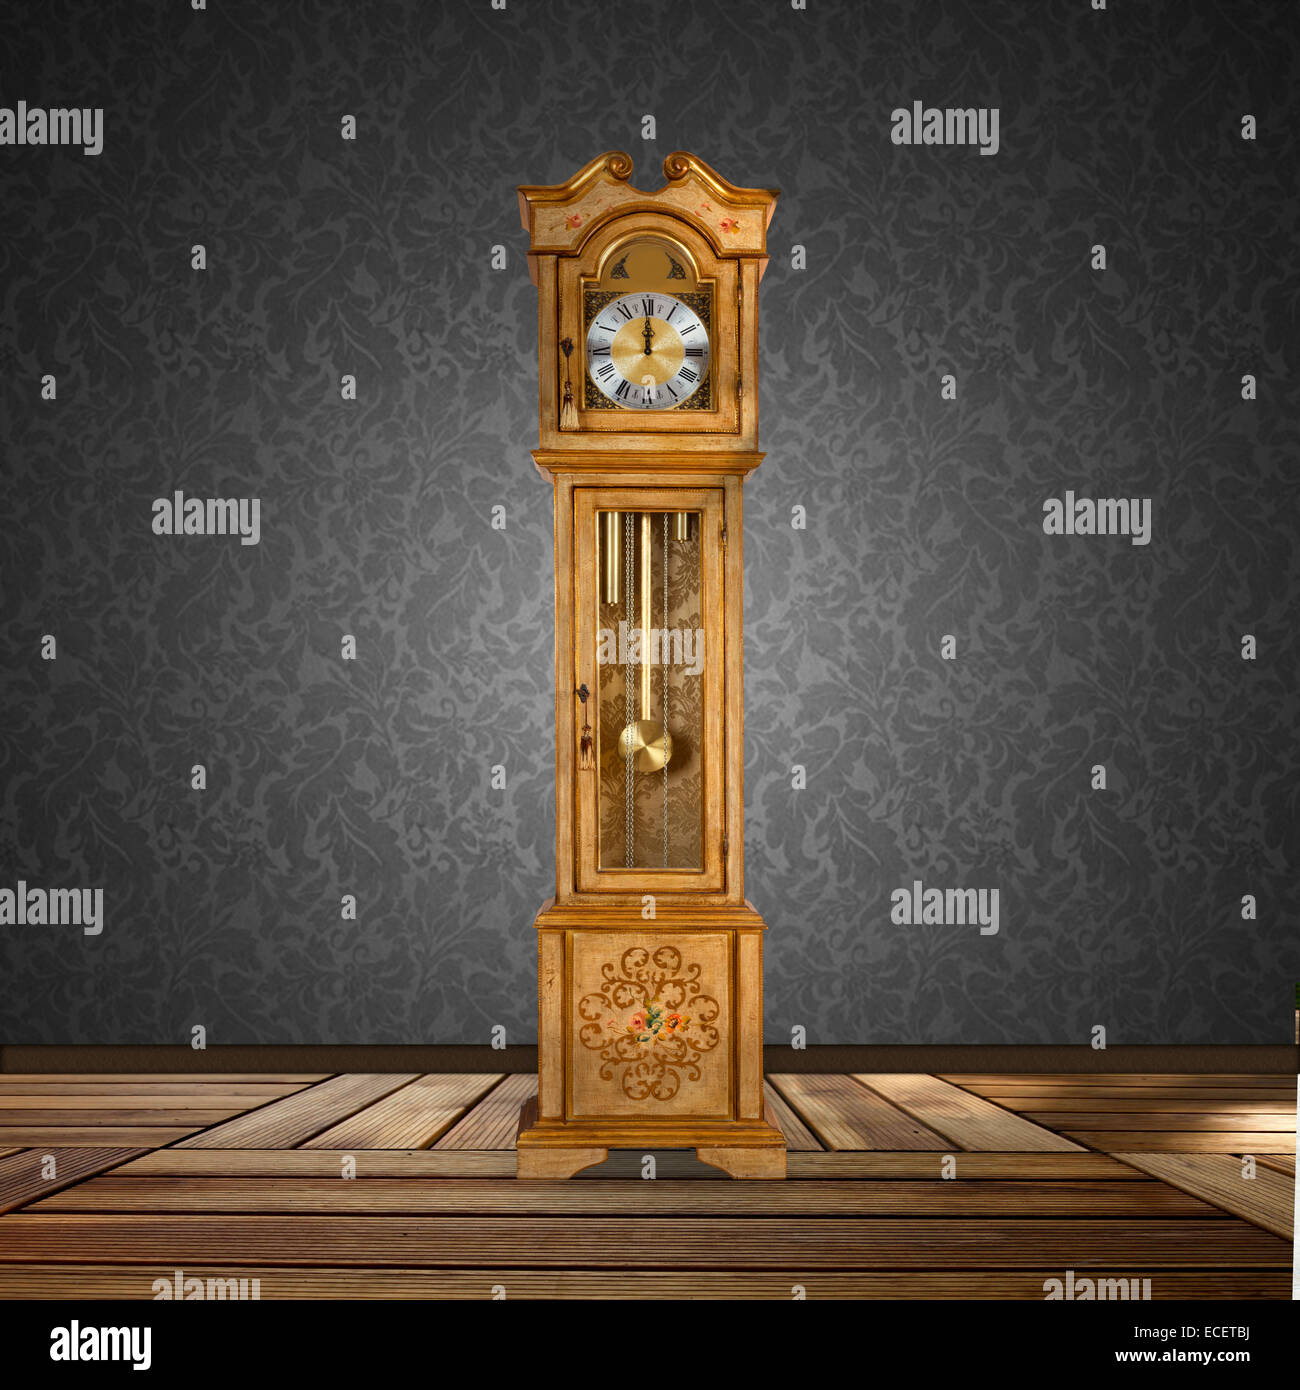 Old grandfather clock isolated in a empty room. Stock Photo